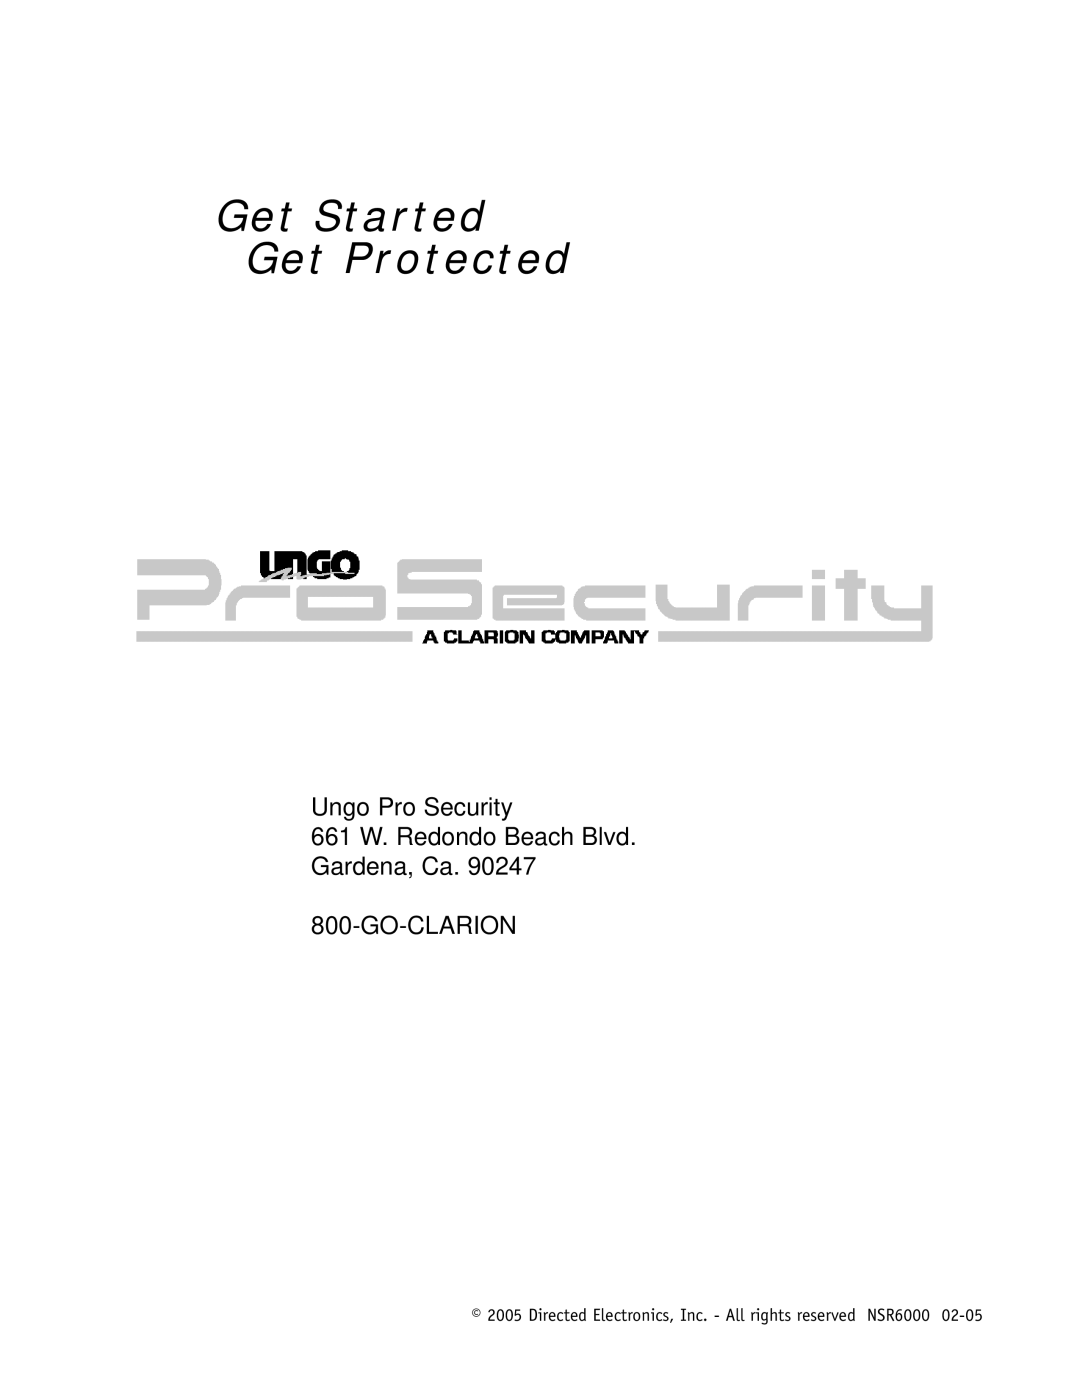 Directed Electronics SR6000 manual Get Started Get Protected, Ungo Pro Security 661 W. Redondo Beach Blvd 